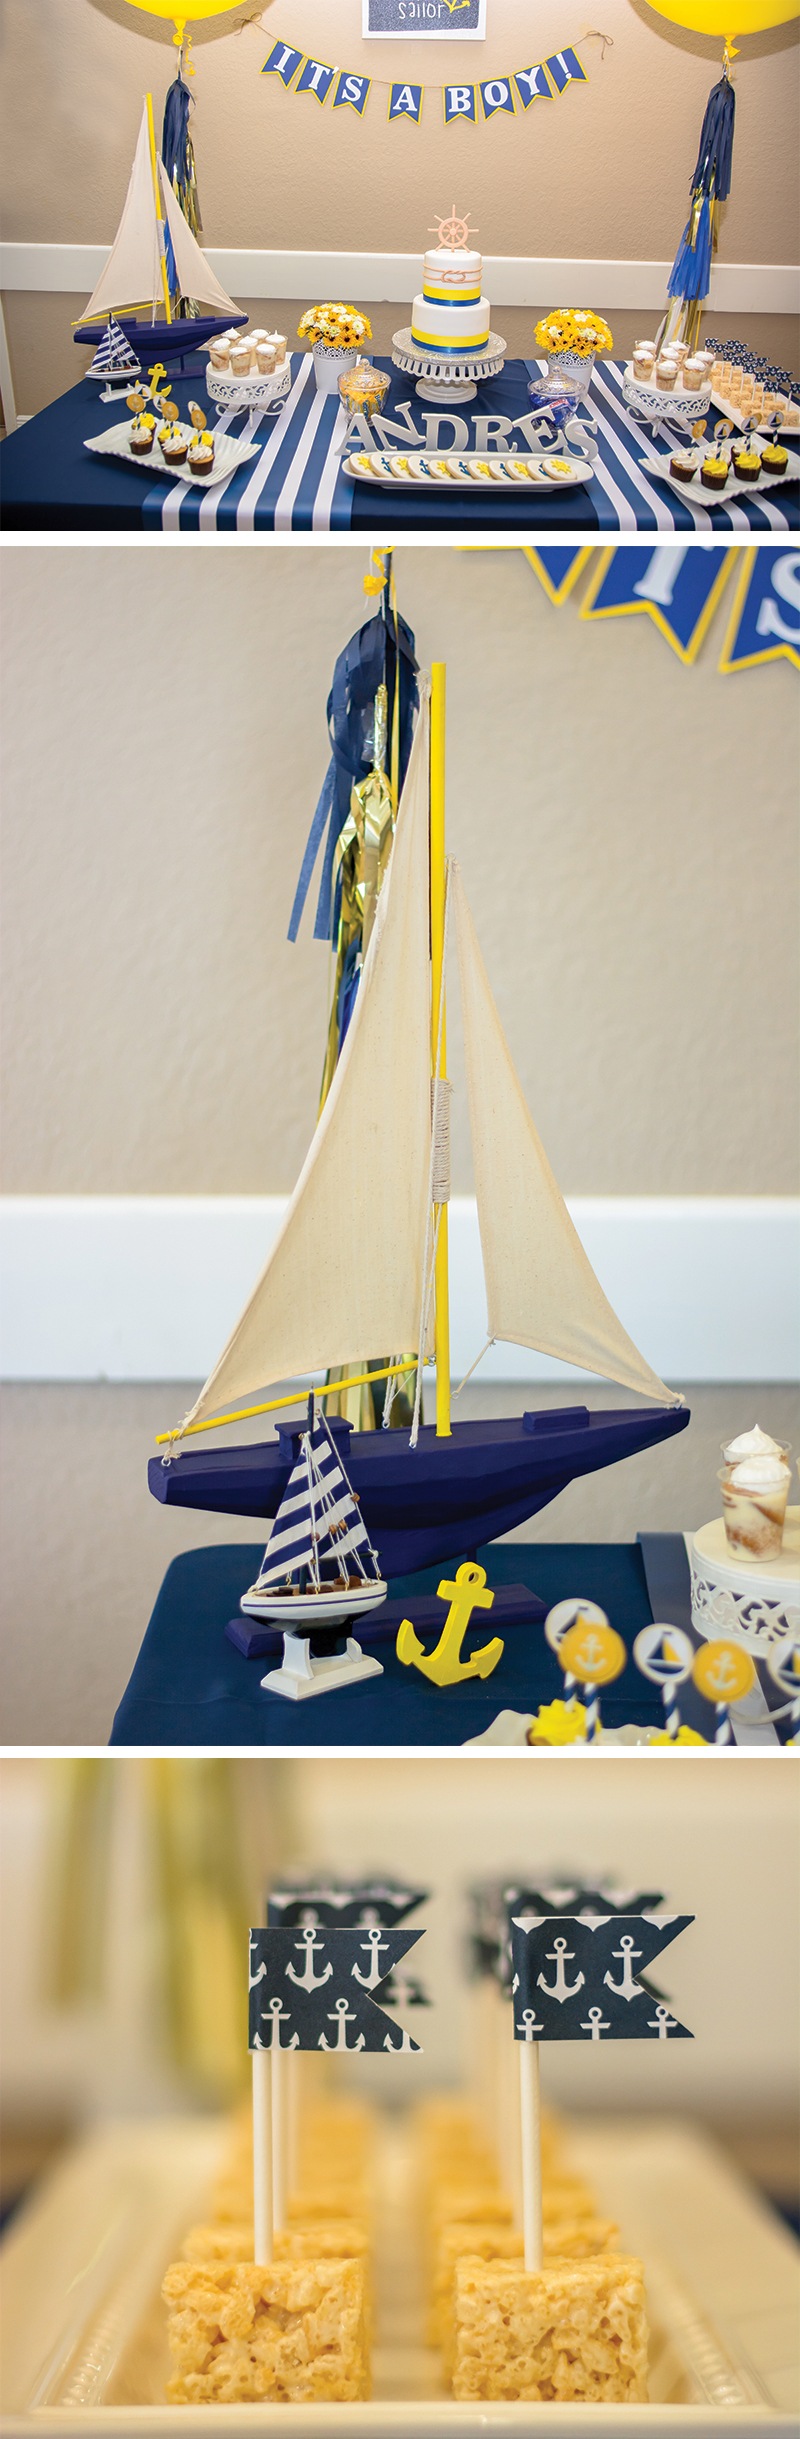 Nautical Baby Shower Theme on Love The Day